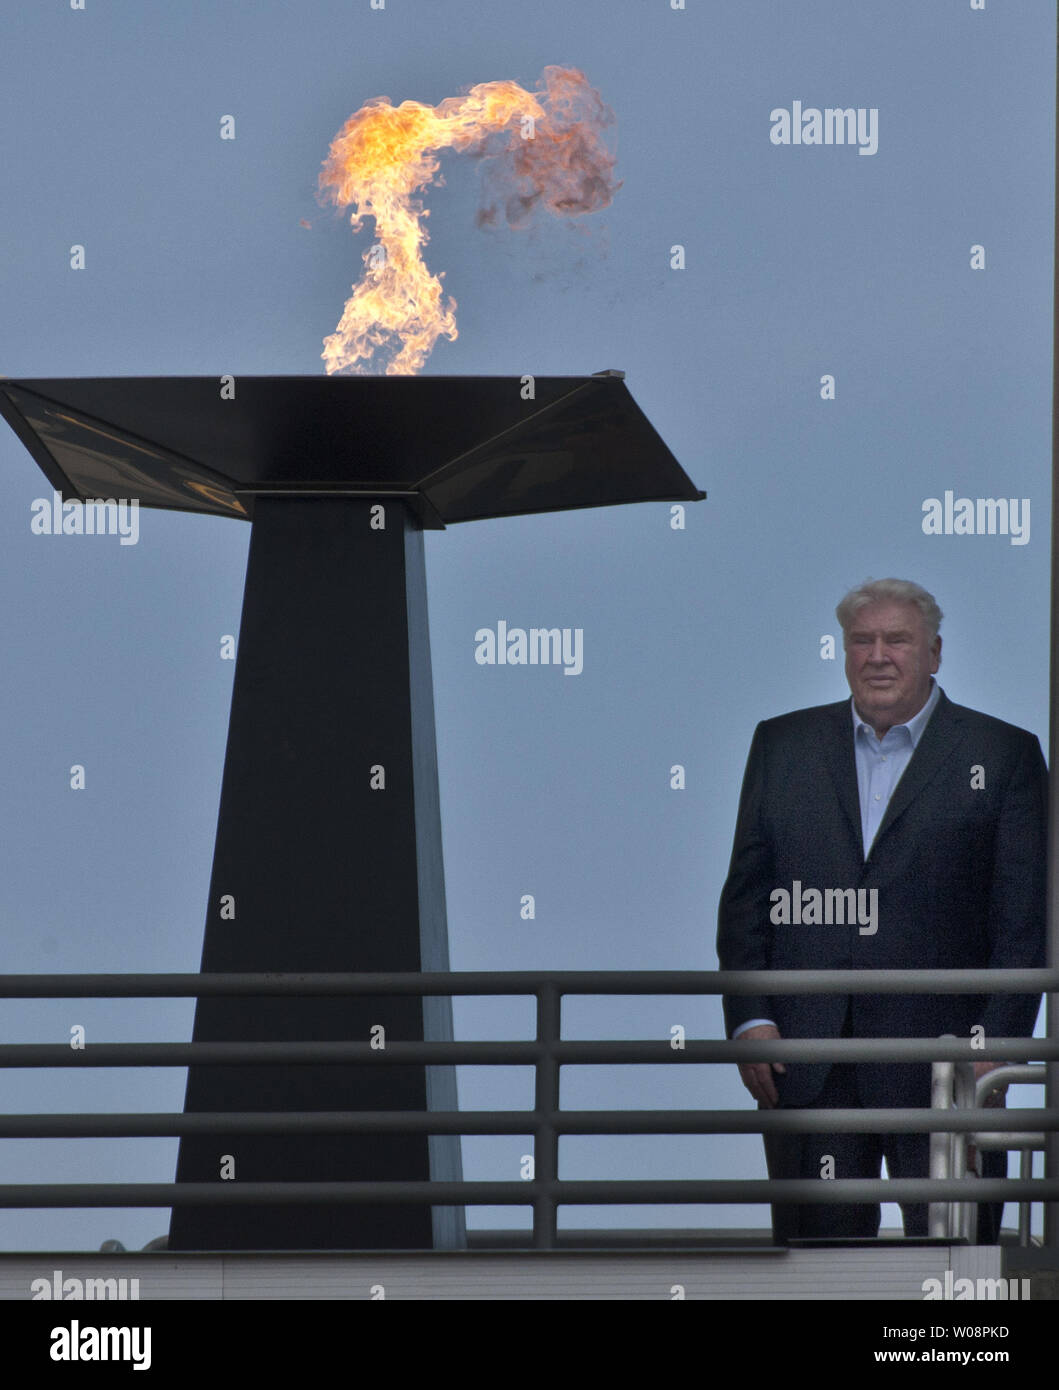 Former Oakland Raiders  coach John Madden stands beside a flame lit in tribute to the late Al Davis, the Raiders' owner who died 10/8, at a halftime ceremony at the Coliseum during a game against the Cleveland Browns on October 16, 2011 in Oakland, California.     UPI/Terry Schmitt Stock Photo